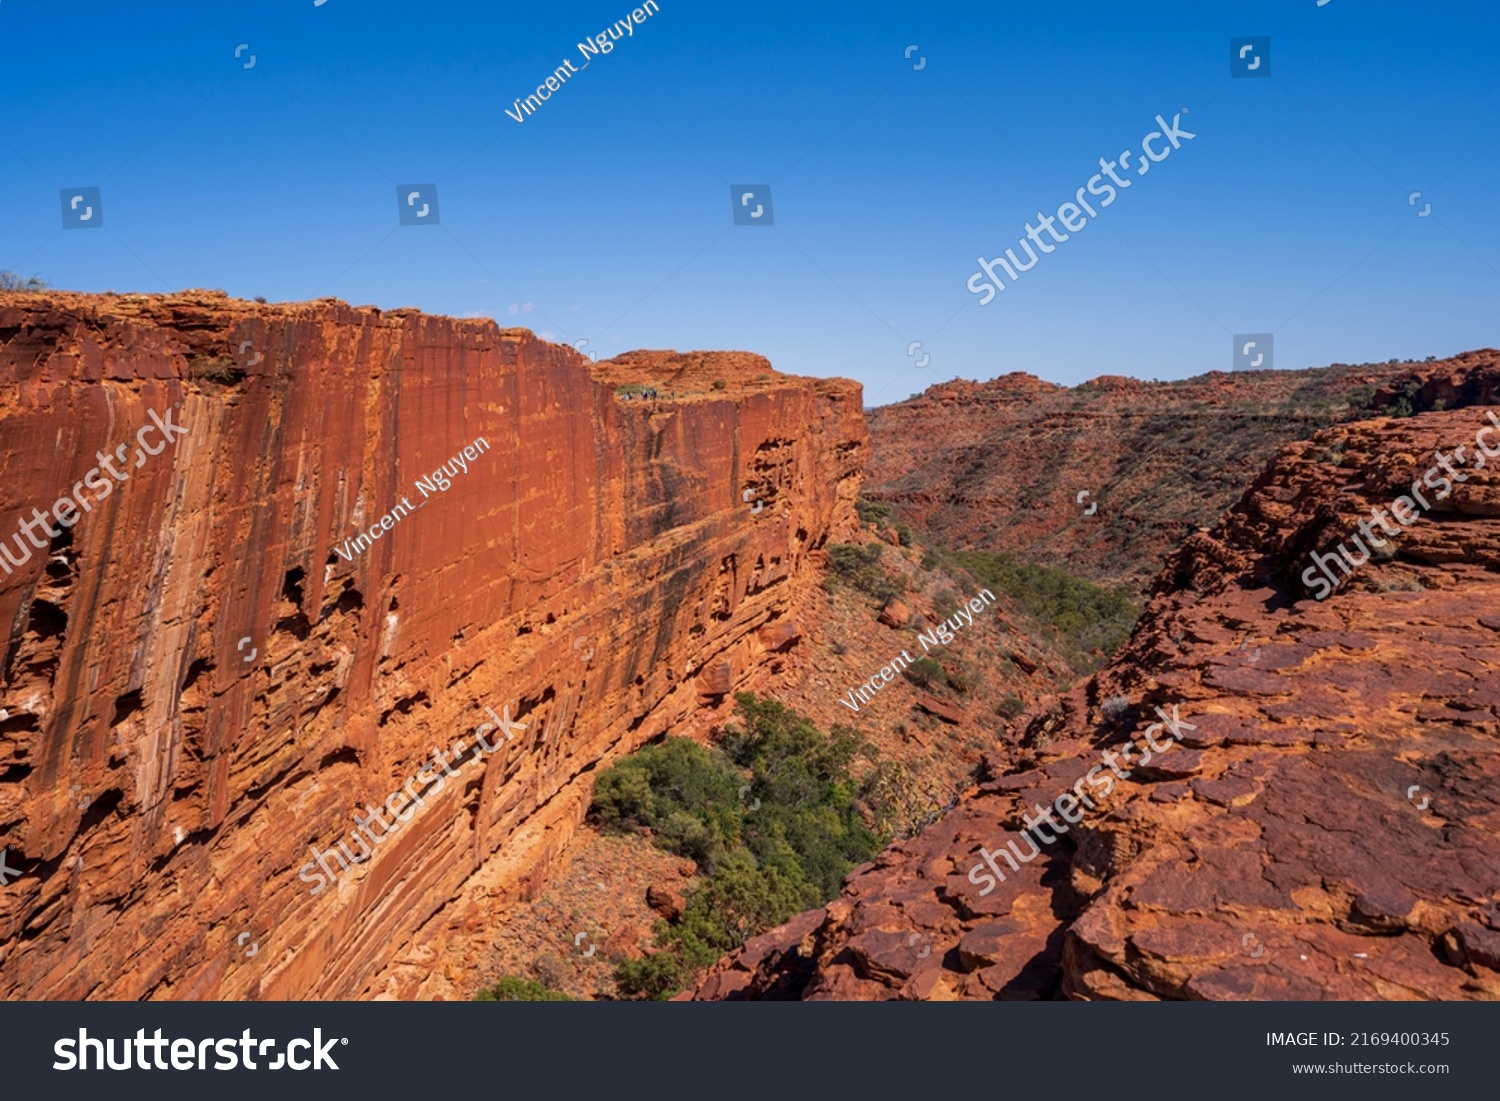 Kings Canyon in the Northern Territory, Australia. #2169400345